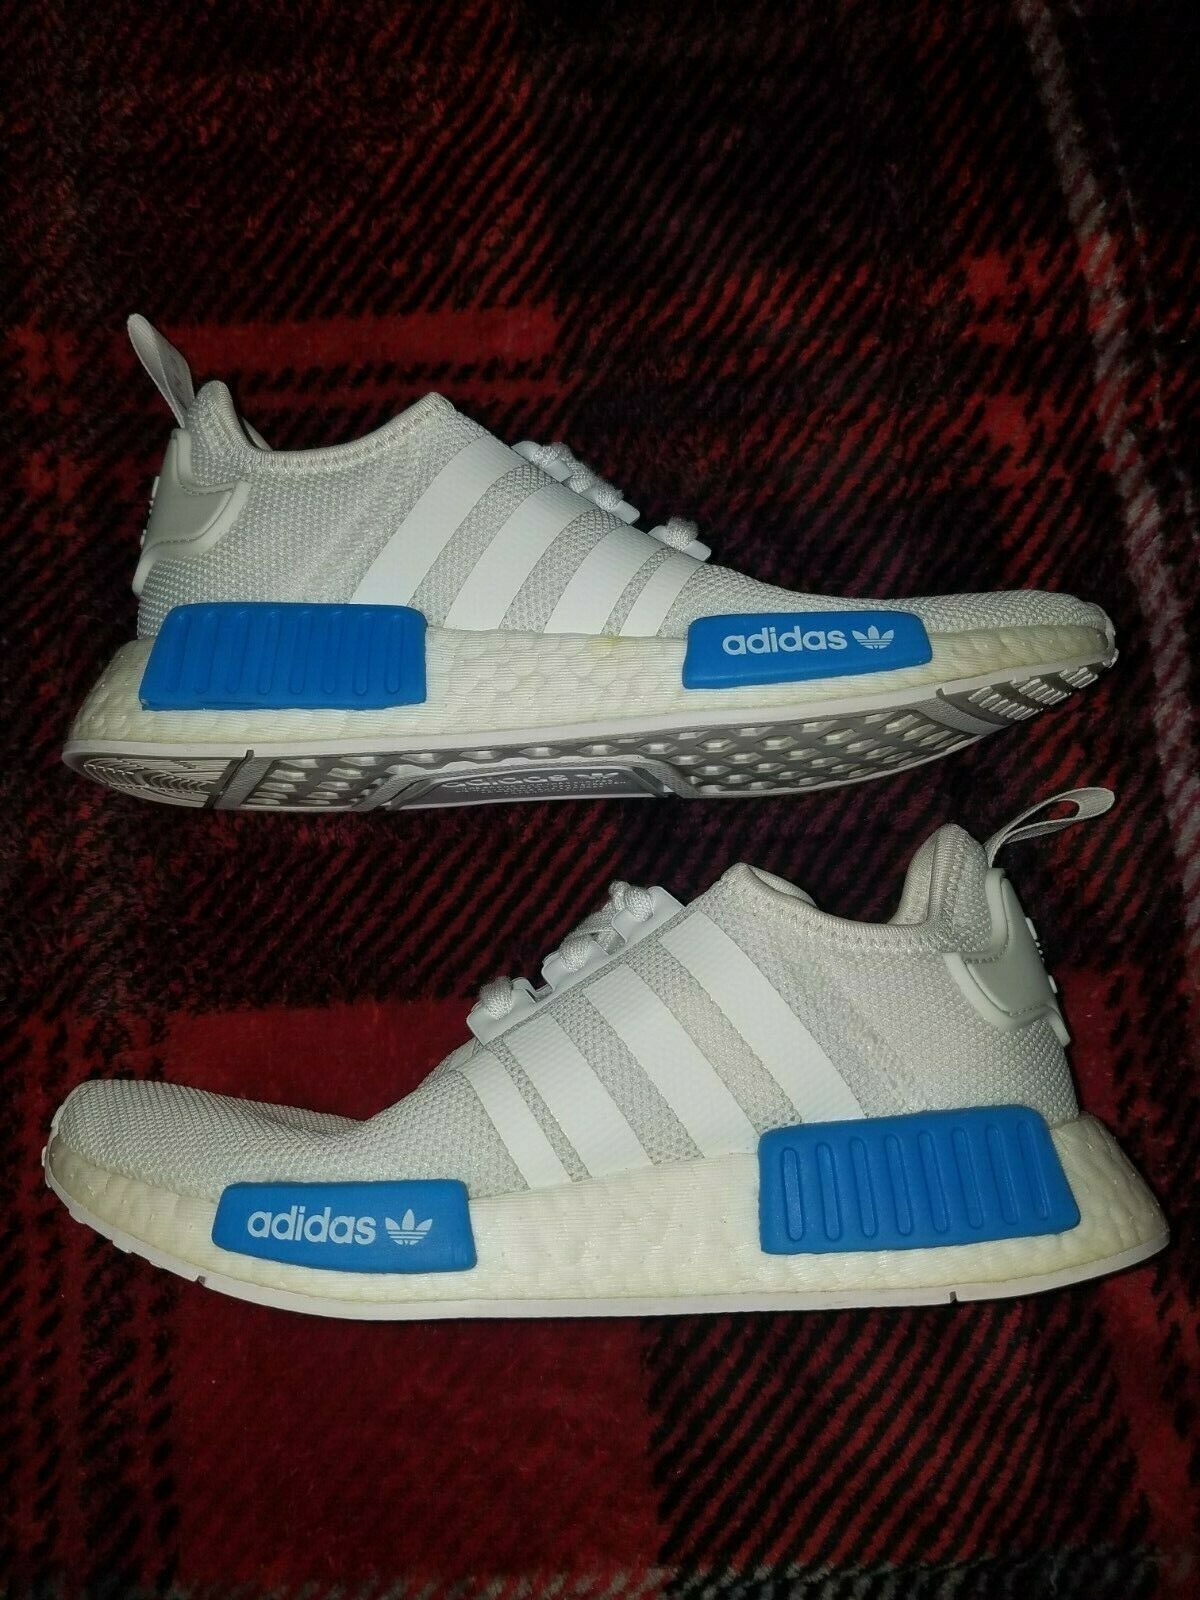 adidas Nmd_R1 Lace Up Youth Size 5 Sneakers Shoes Casual - White